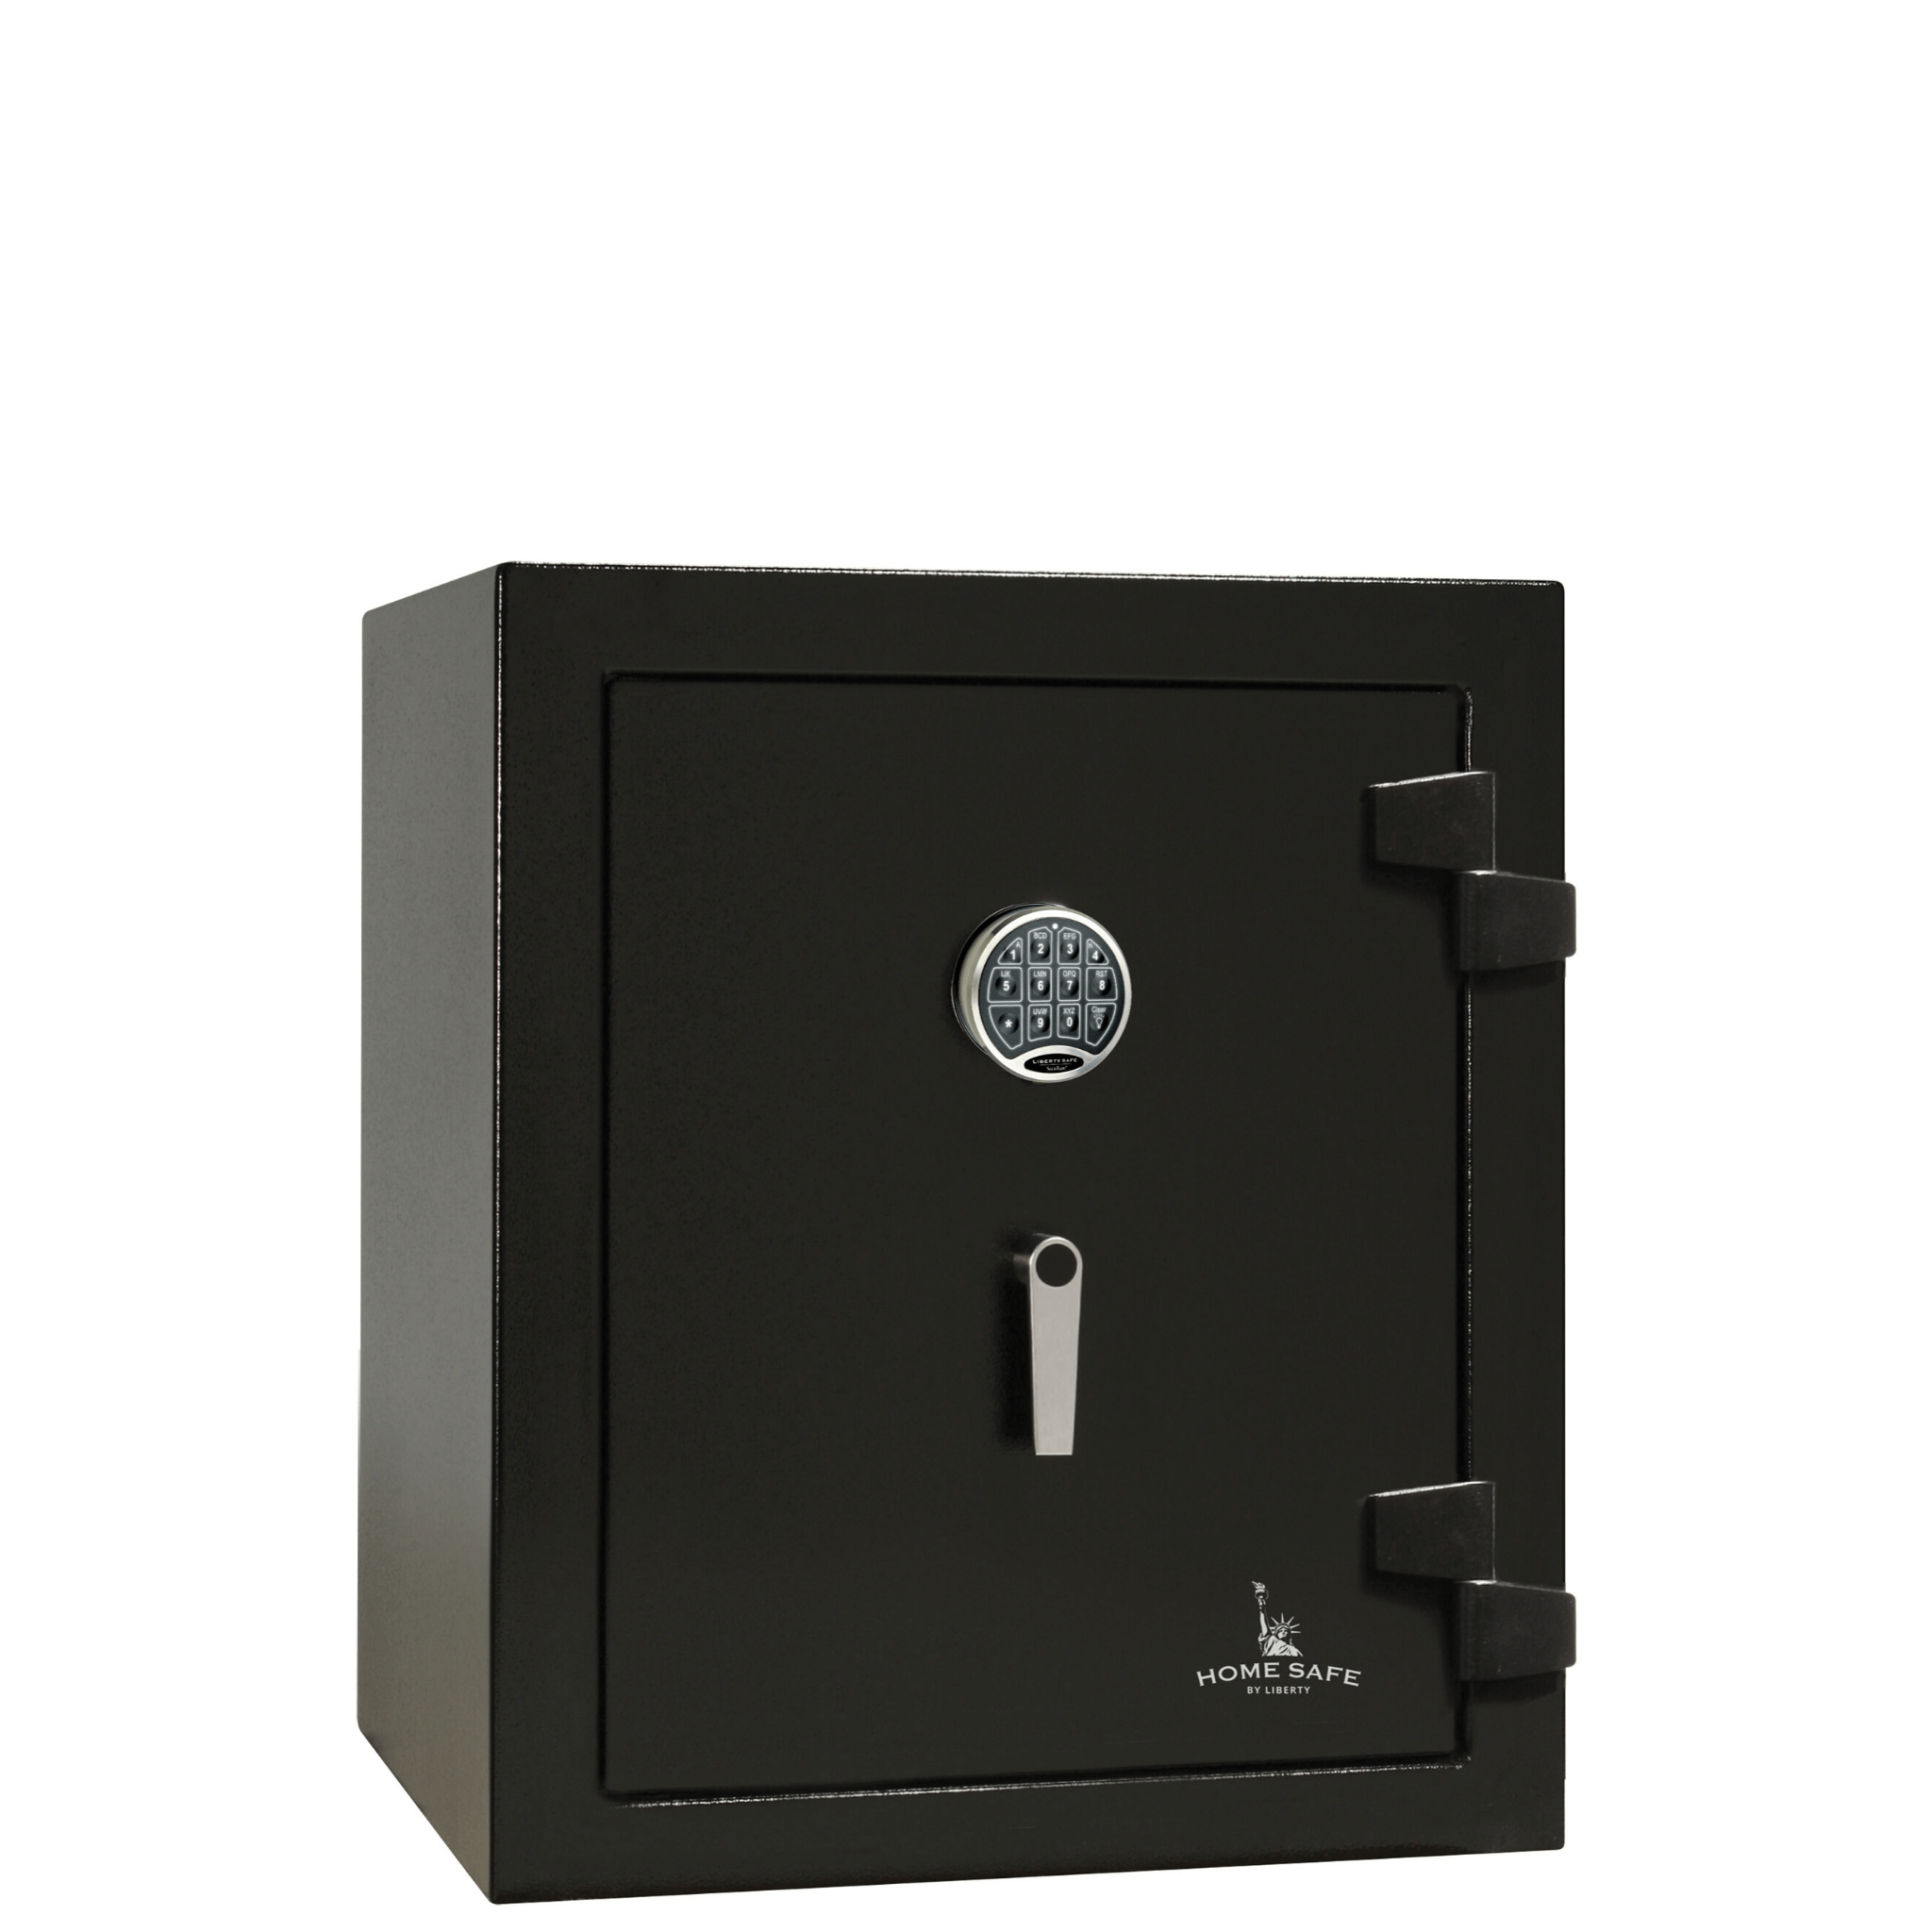 Home Safe | 08 | 60 Minute Fire Protection | Black | Electronic Lock | Dimensions: 30"(H) x 24.25"(W) x 22"(D)